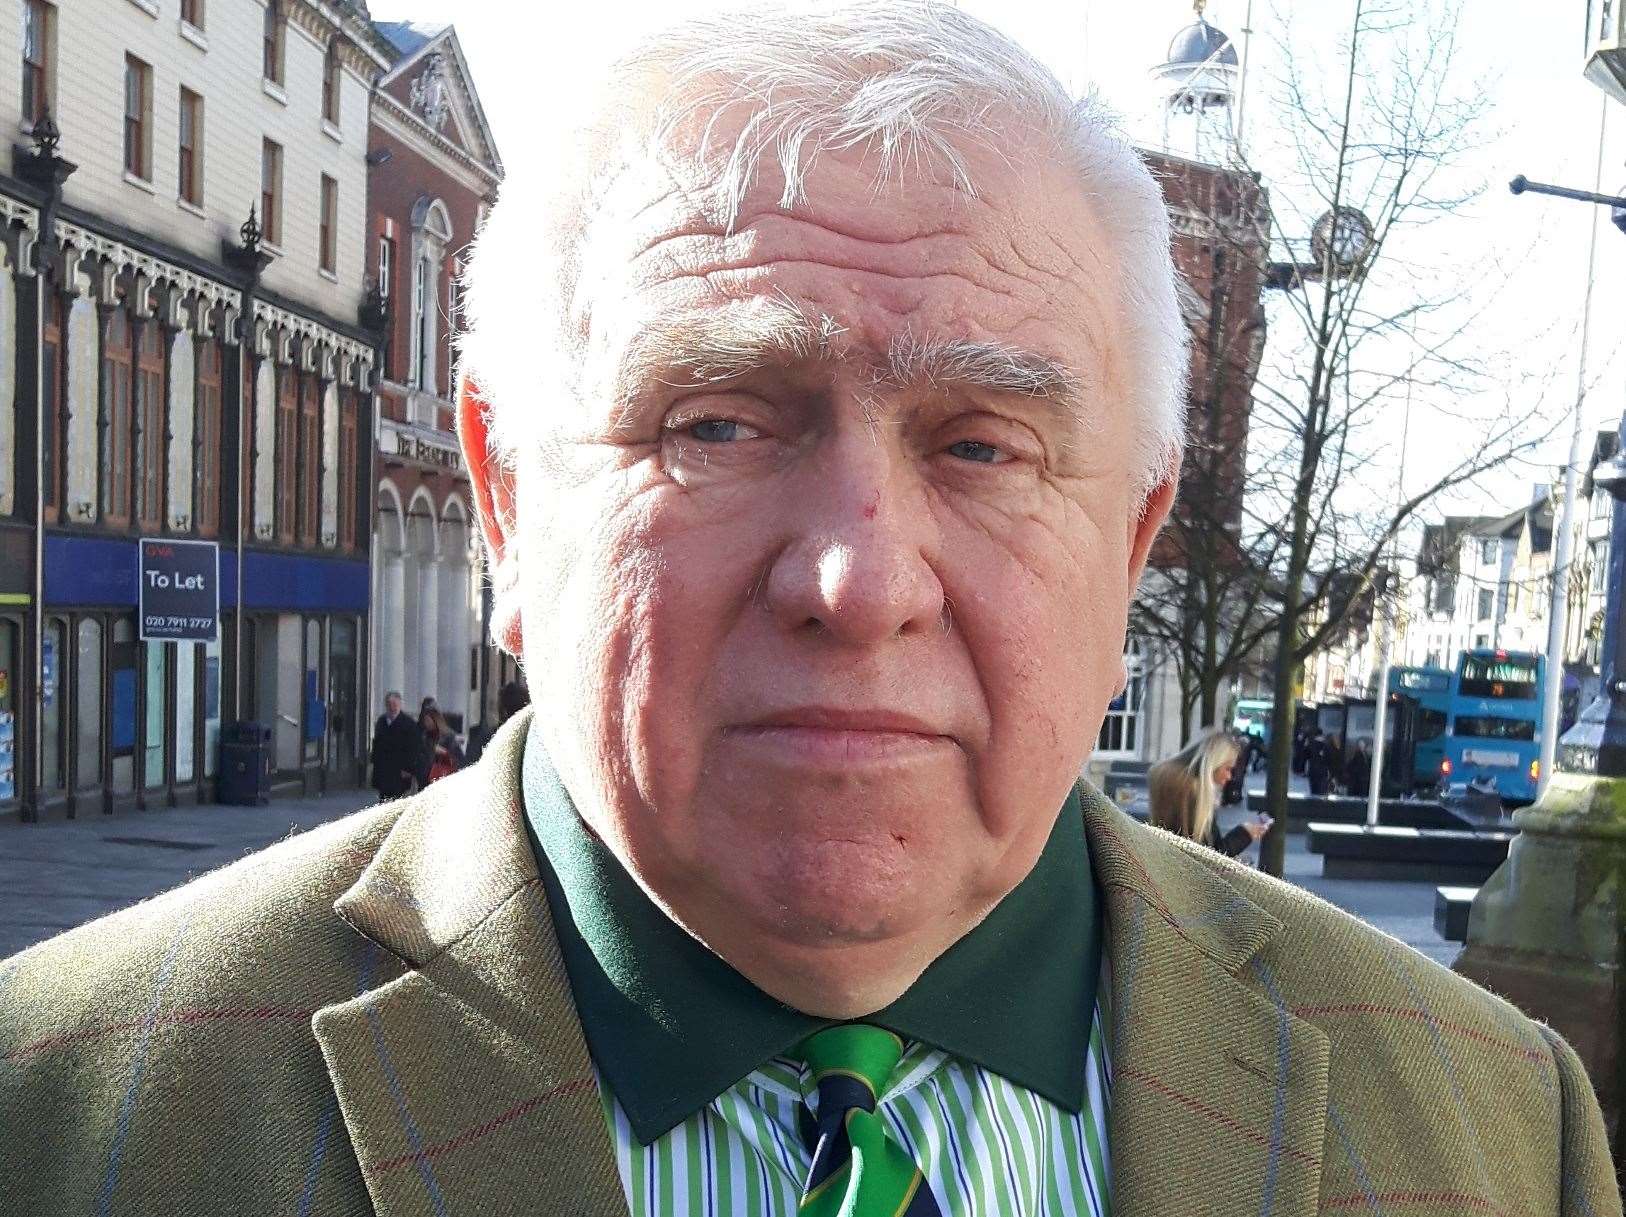 Fergus Wilson is offering a reward for information leading to the prosecution of the person who burgled his home